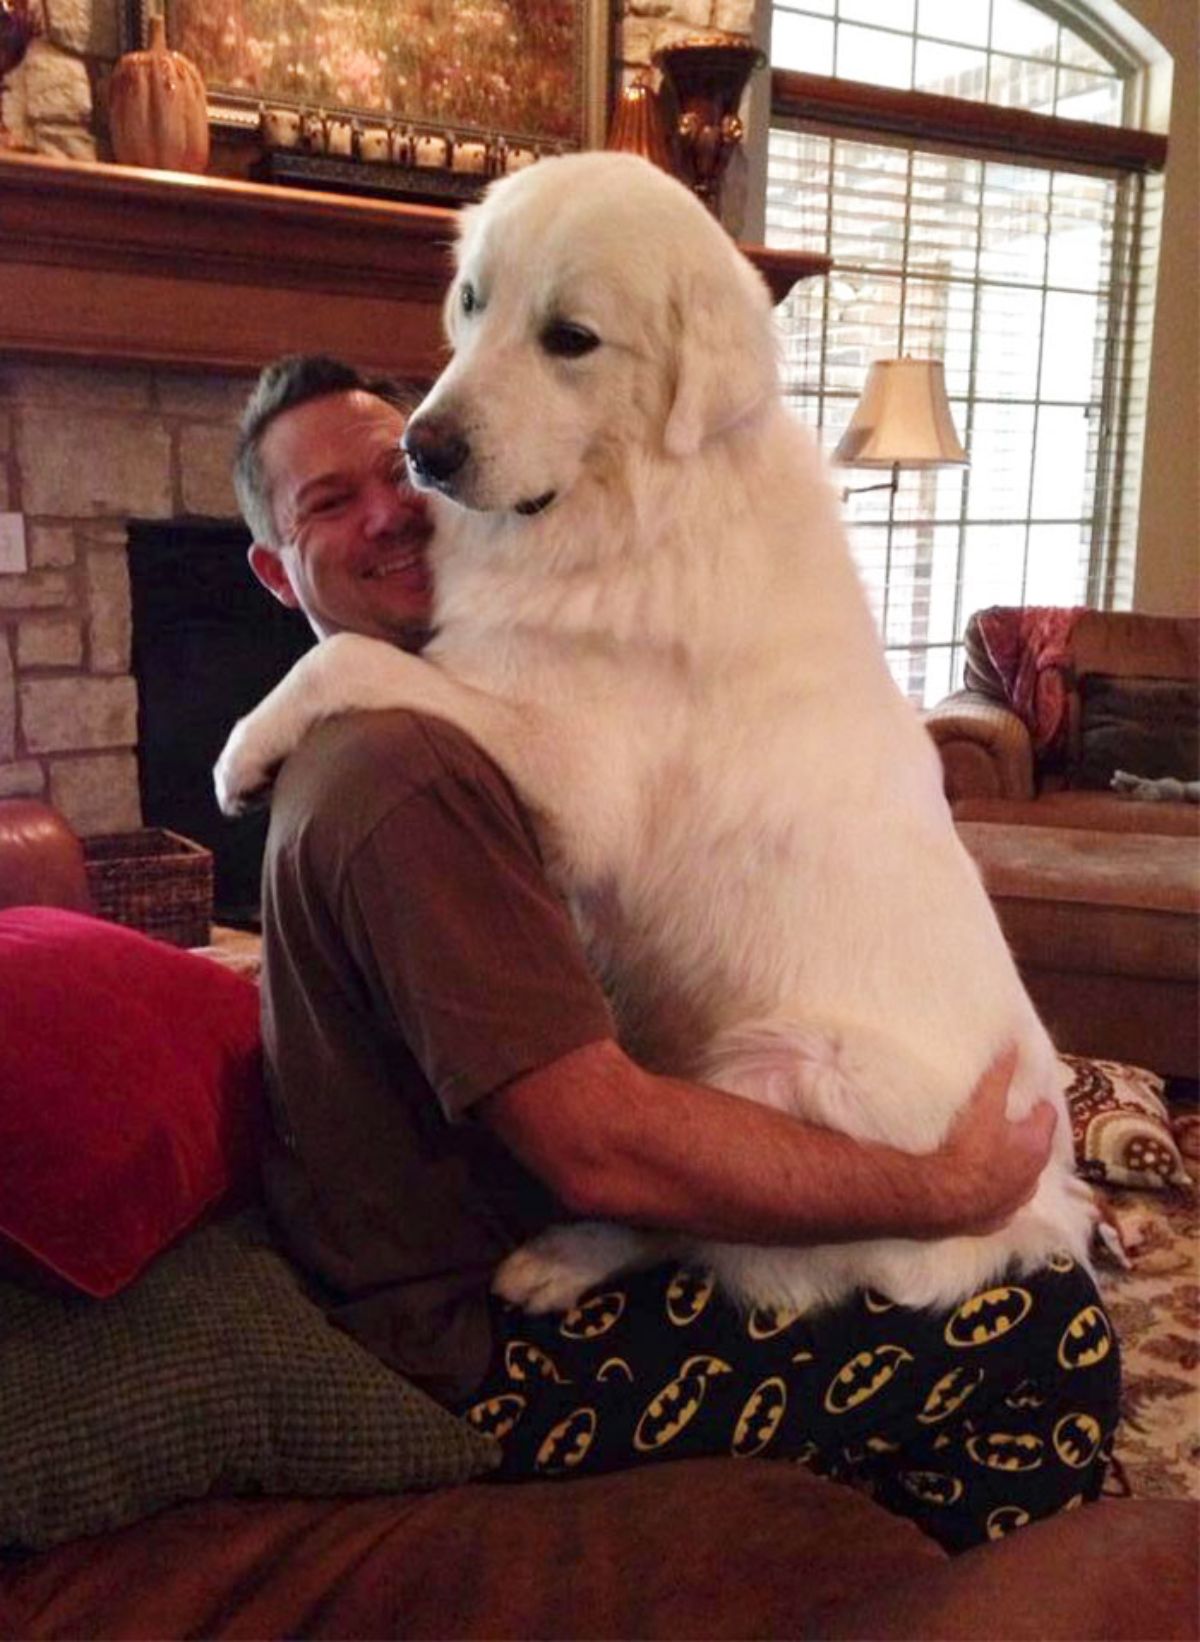 white great pyrenees sitting astride a man and they're hugging each other